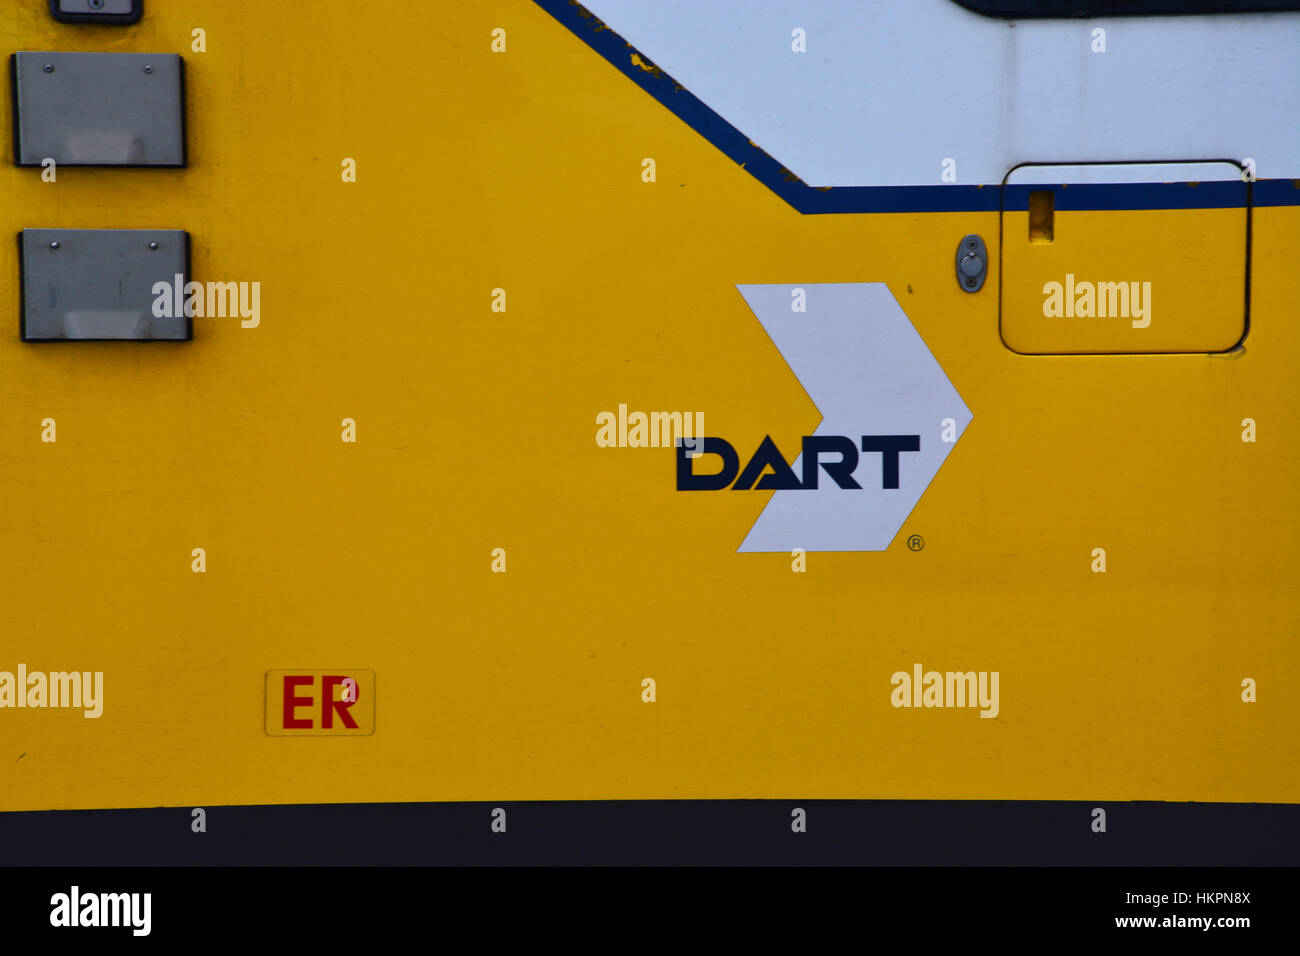 The Dallas Area Rapid Transit logo on the side of a train car. Stock Photo